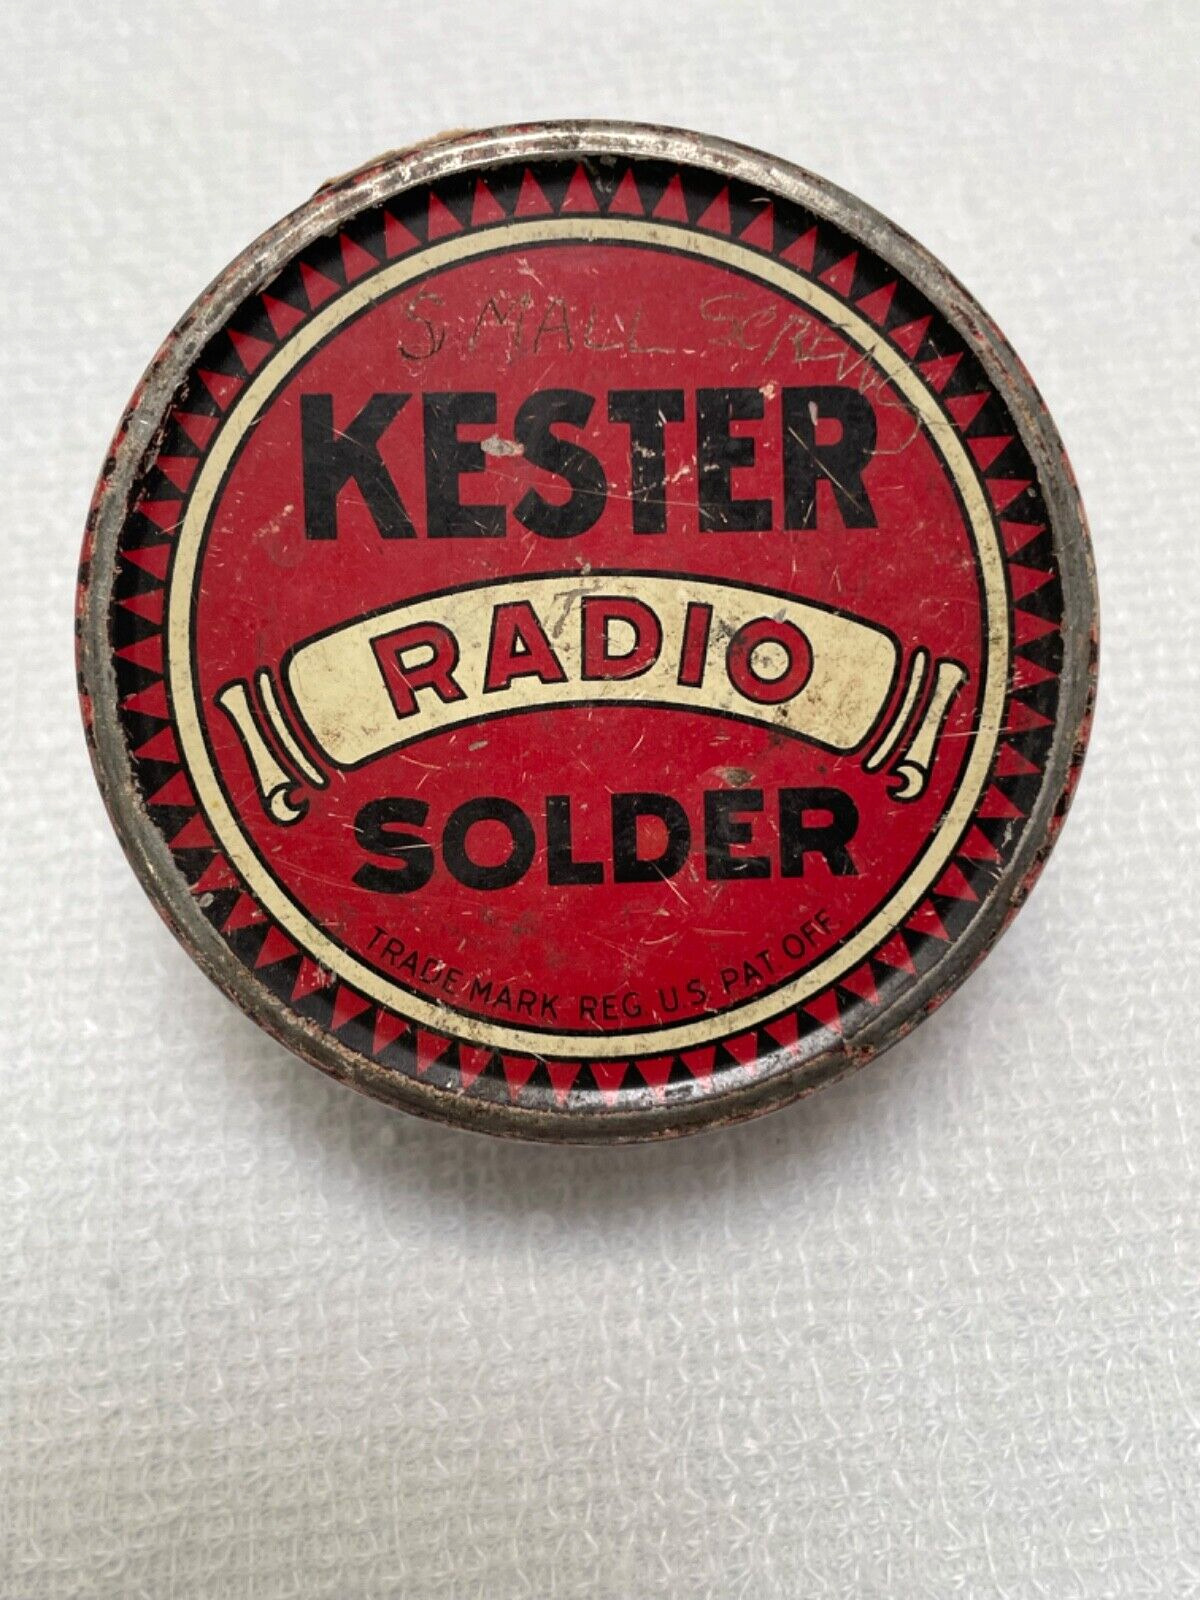 Vintage Kester Radio Solder Tin Small Round Container